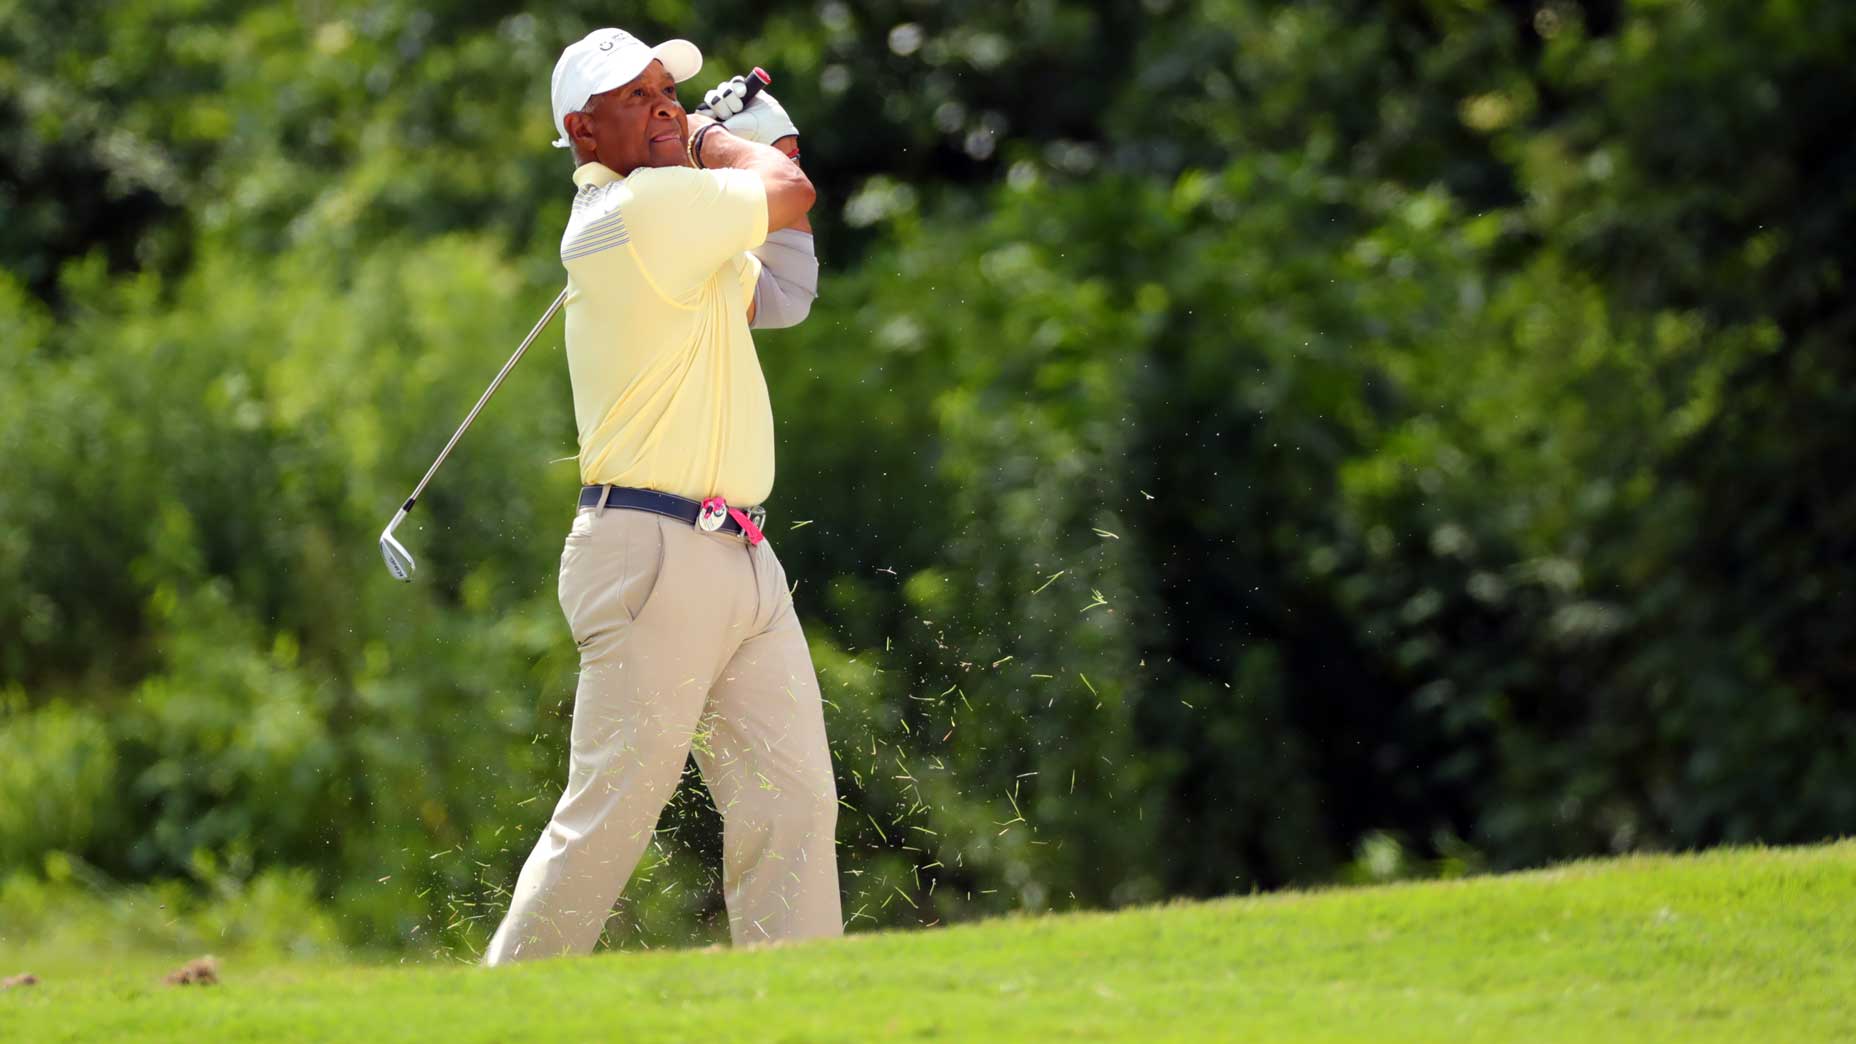 Ozzie Smith plays a shot on the 12th hole during the first round of the BMW Charity Pro-Am presented by Synnex Corporation at the Thornblade Club on June 10, 2021 in Greer, South Carolina.